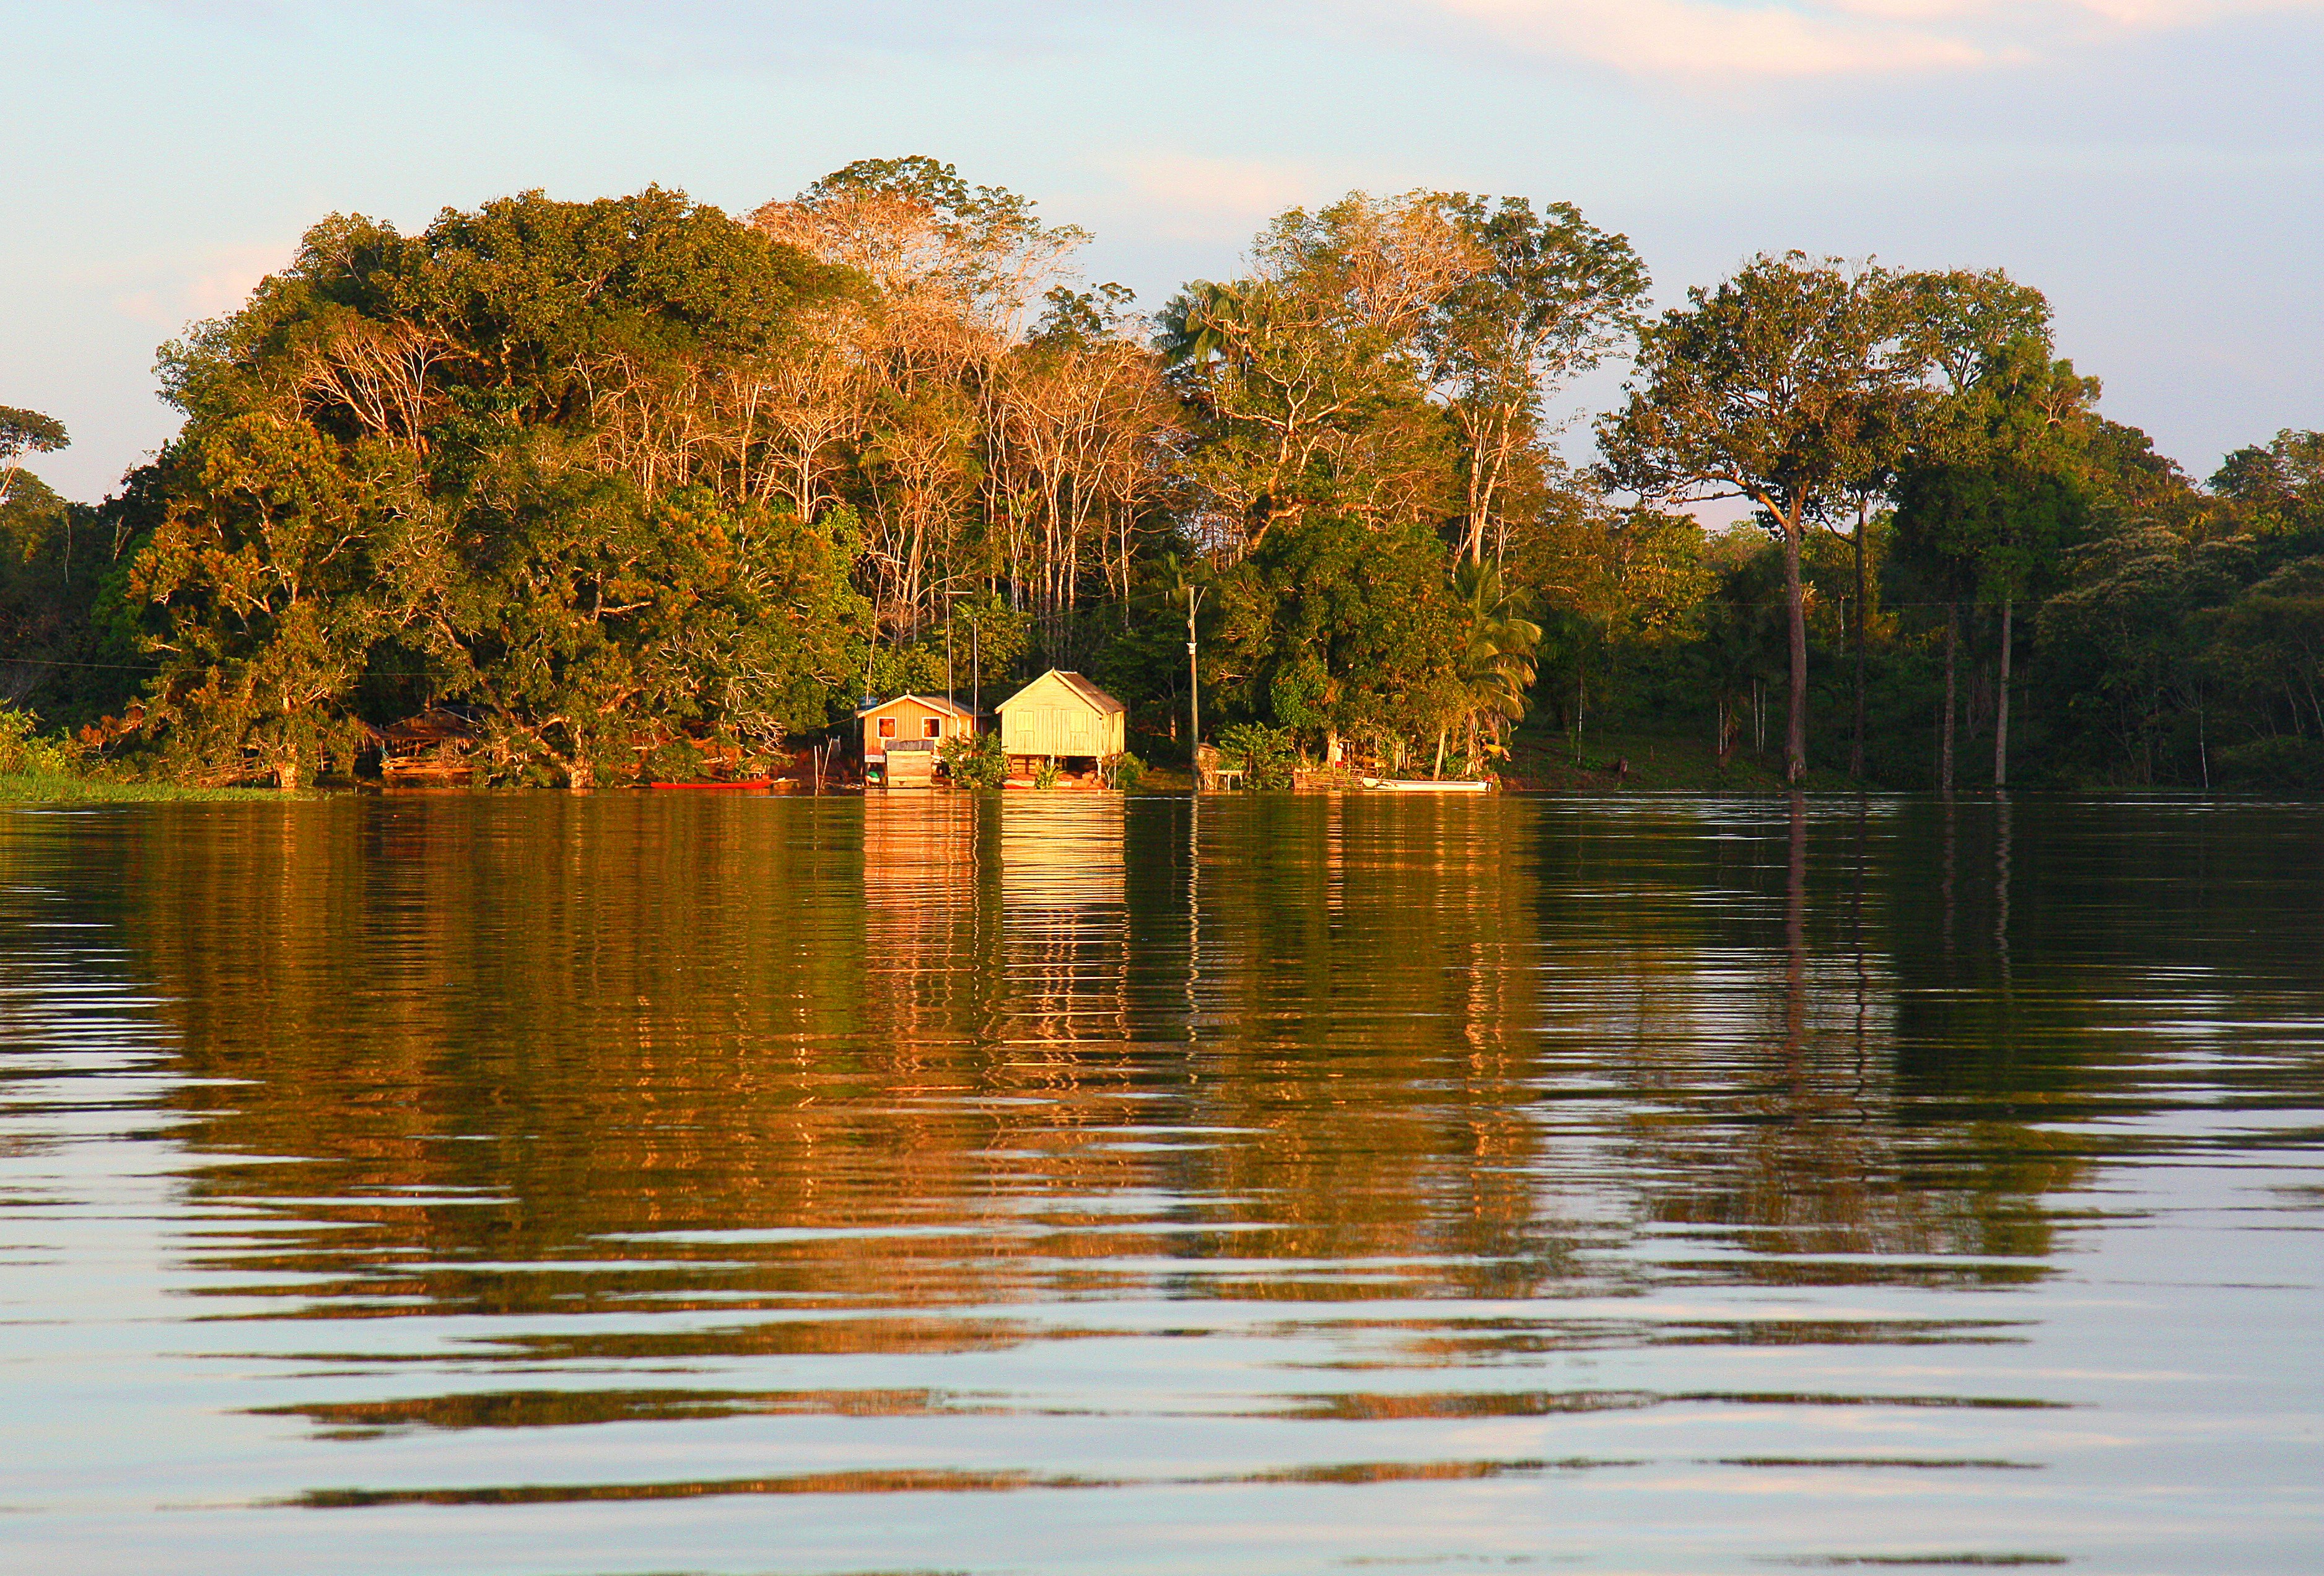 A very flooded Amazon River was calm and peaceful in the golden hour.